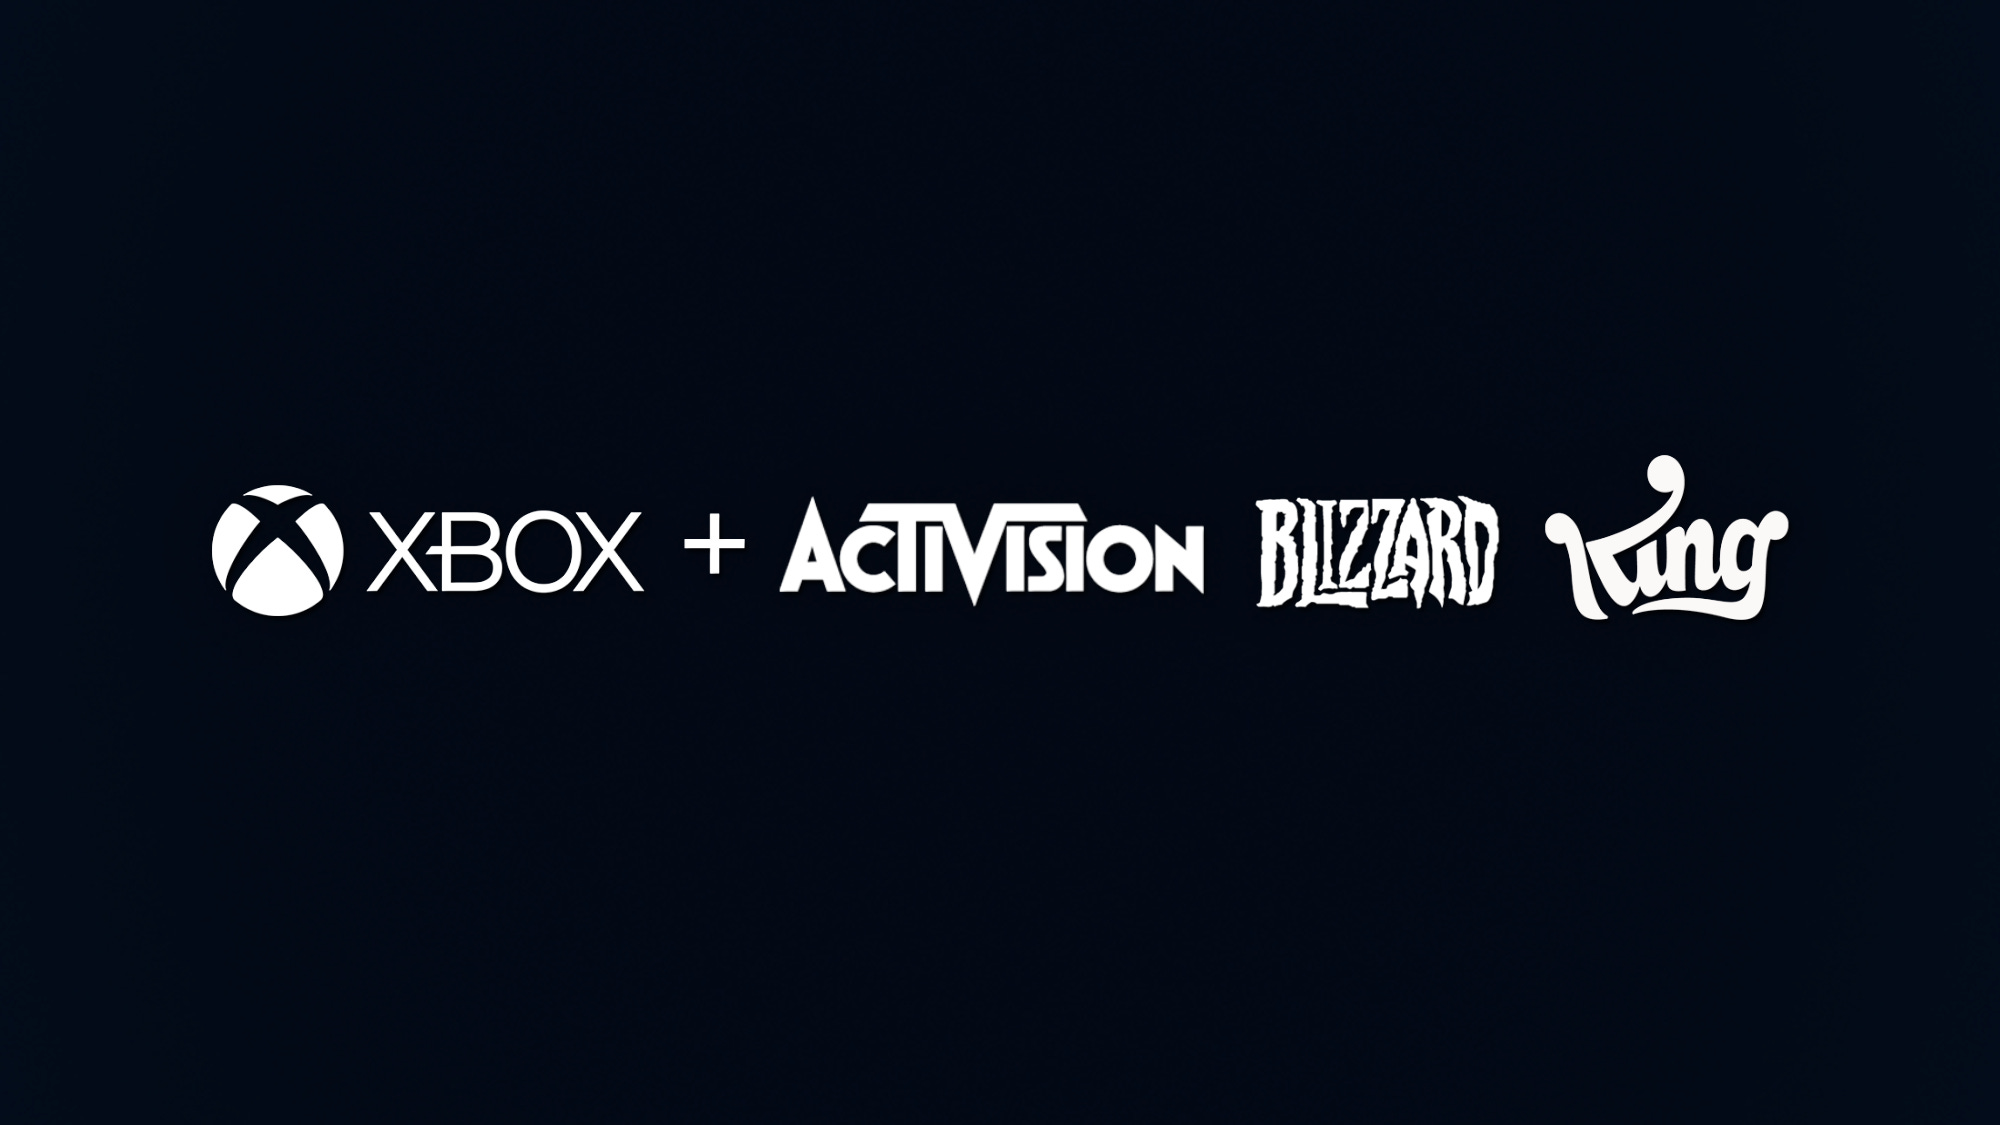 Logos of Xbox, Activision, Blizzard, and King